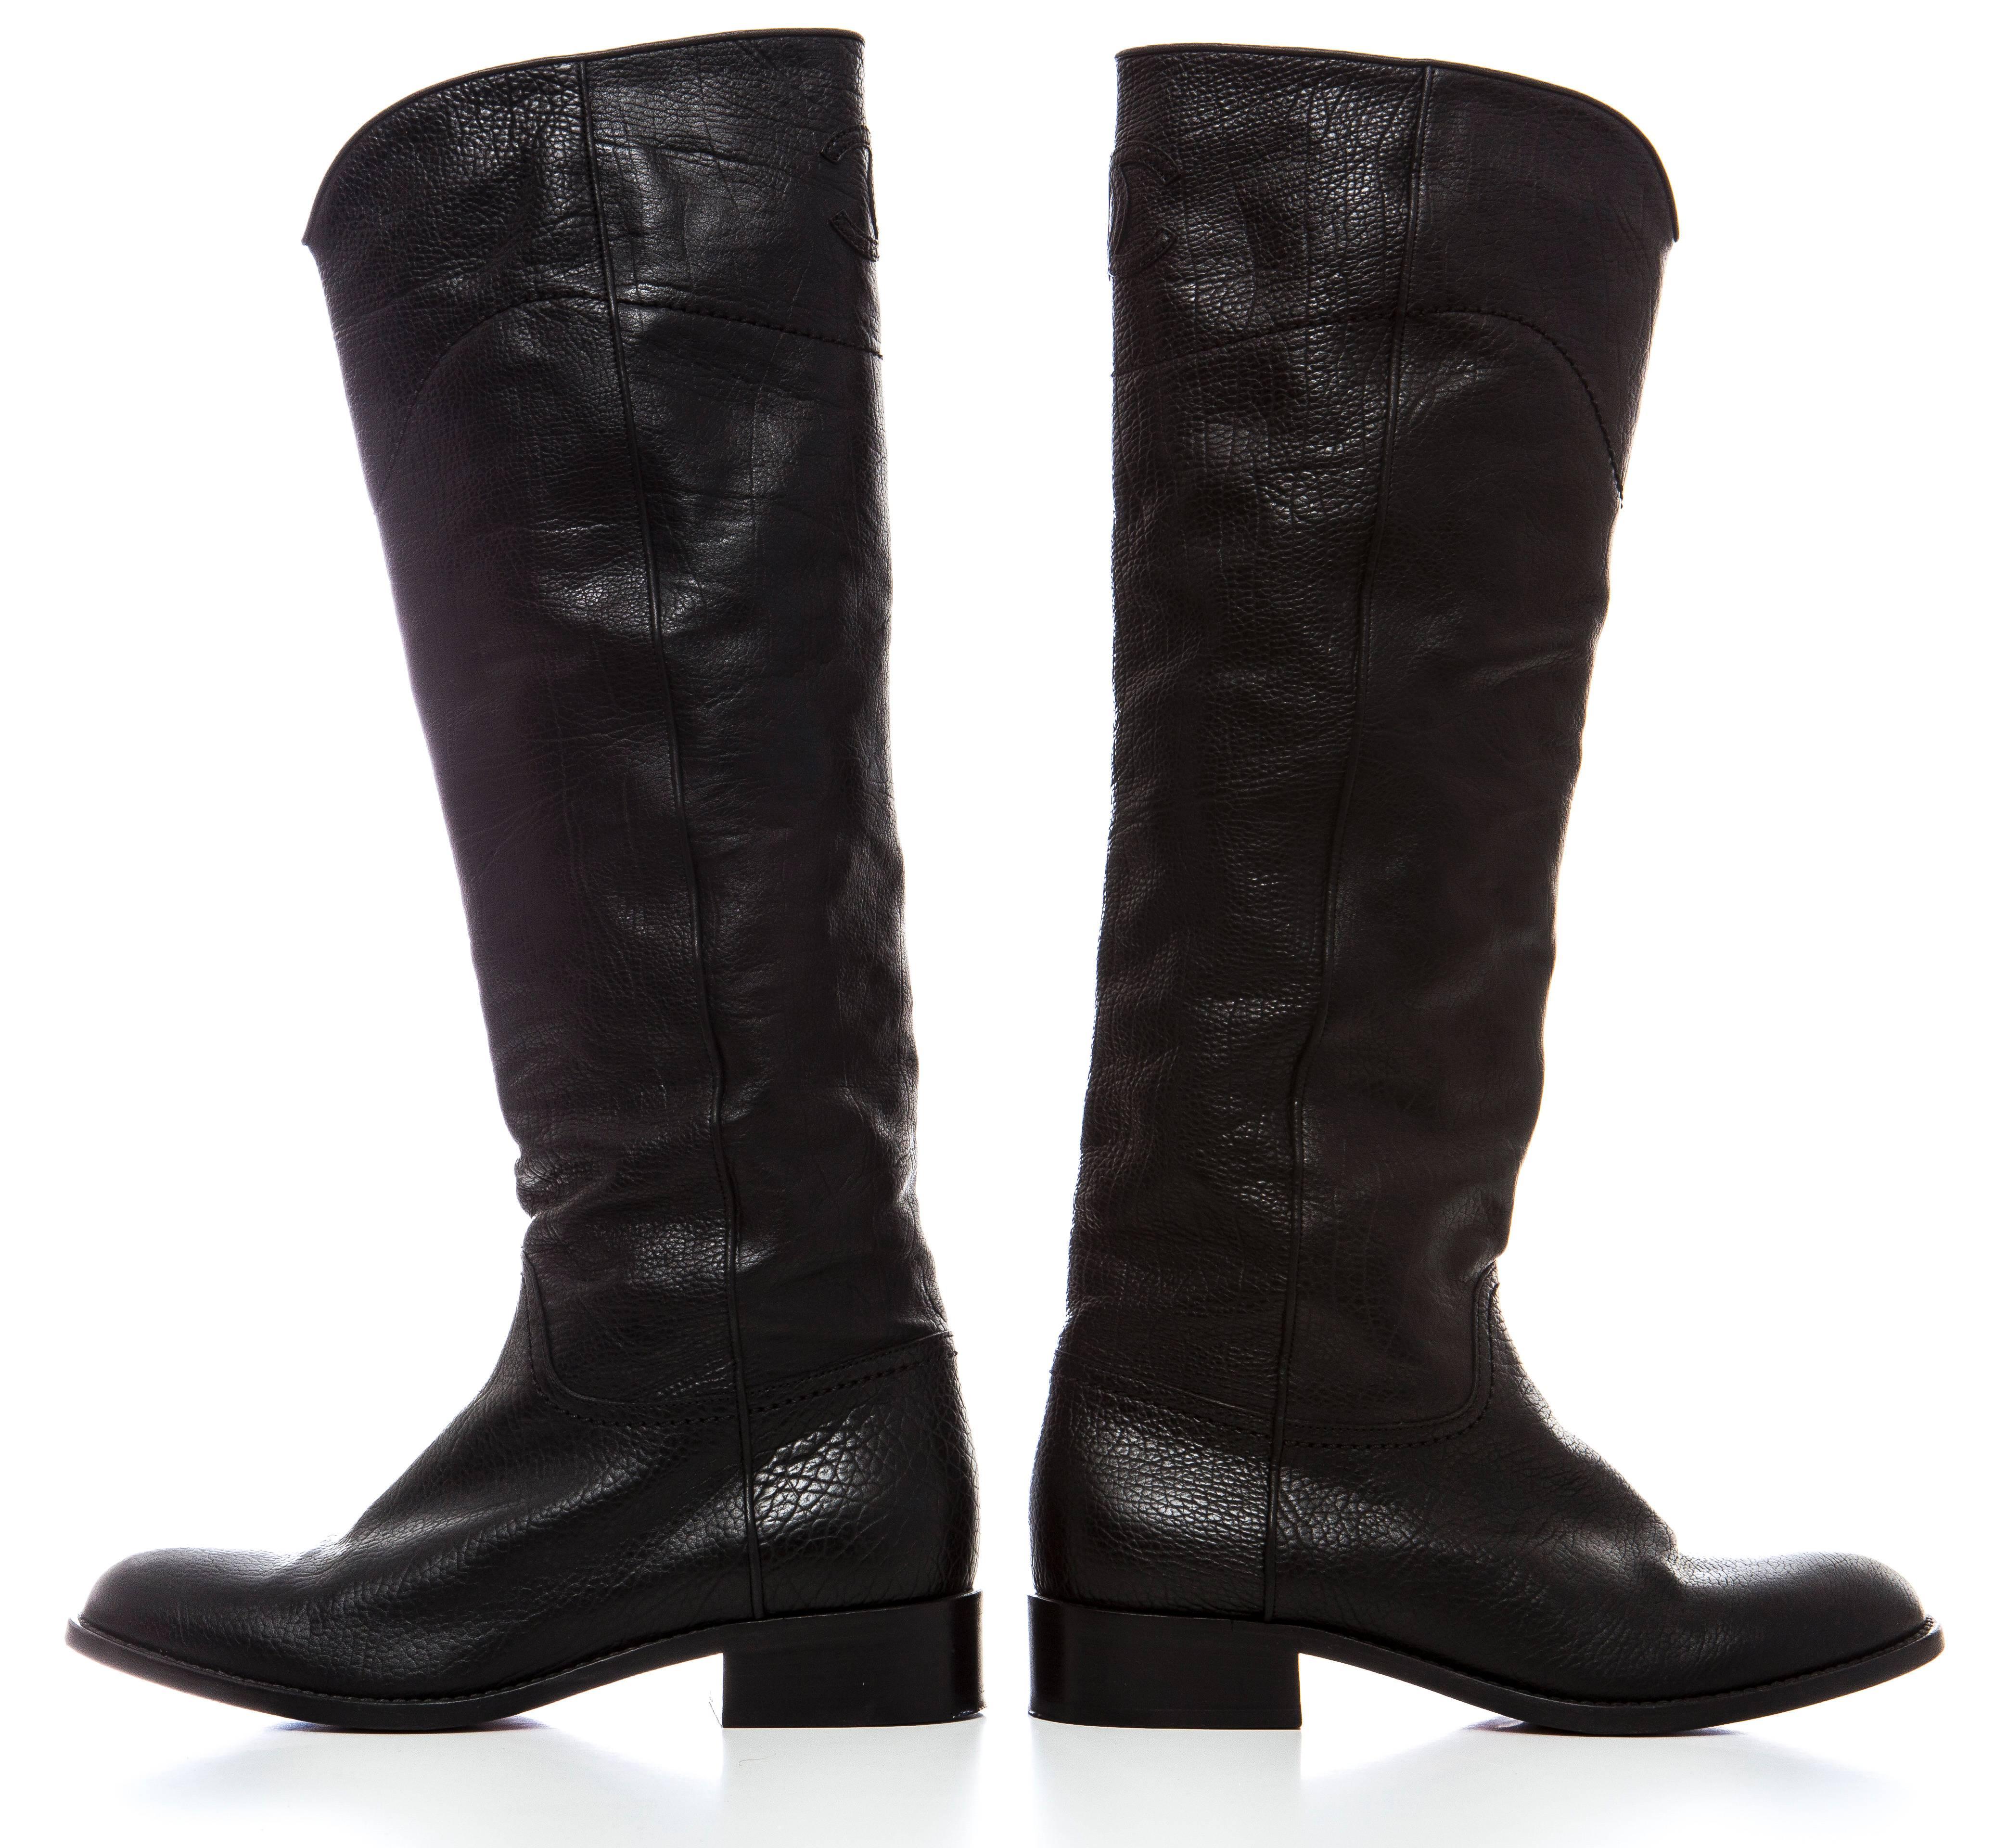 Chanel tall black leather boots with CC detail on back.

EU. 38
US. 8